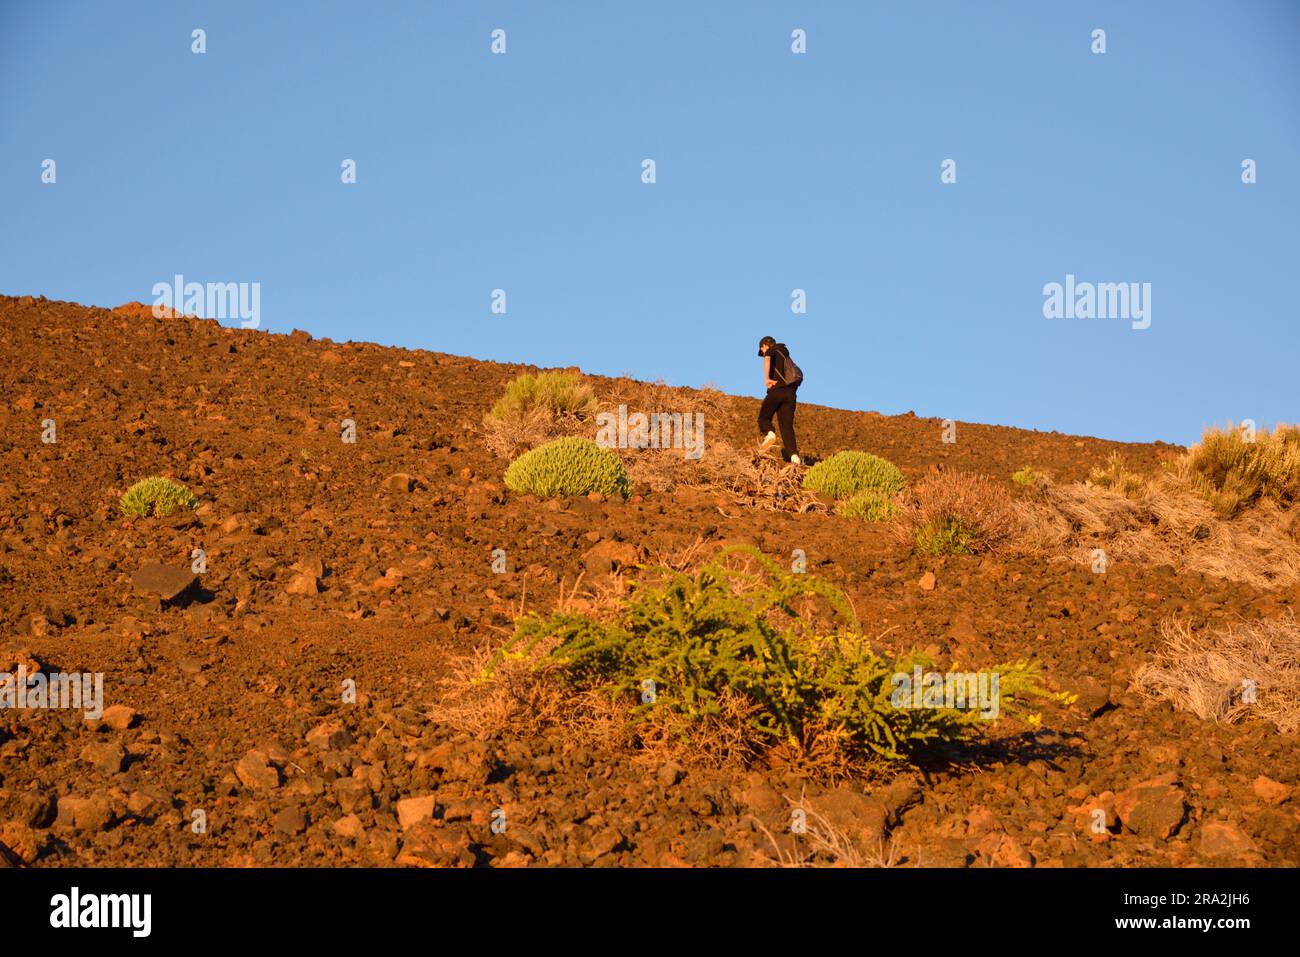 Spain, Canary Islands, Teide National Park, a UNESCO World Heritage Site, climb the slopes of the Teide volcano at sunset Stock Photo